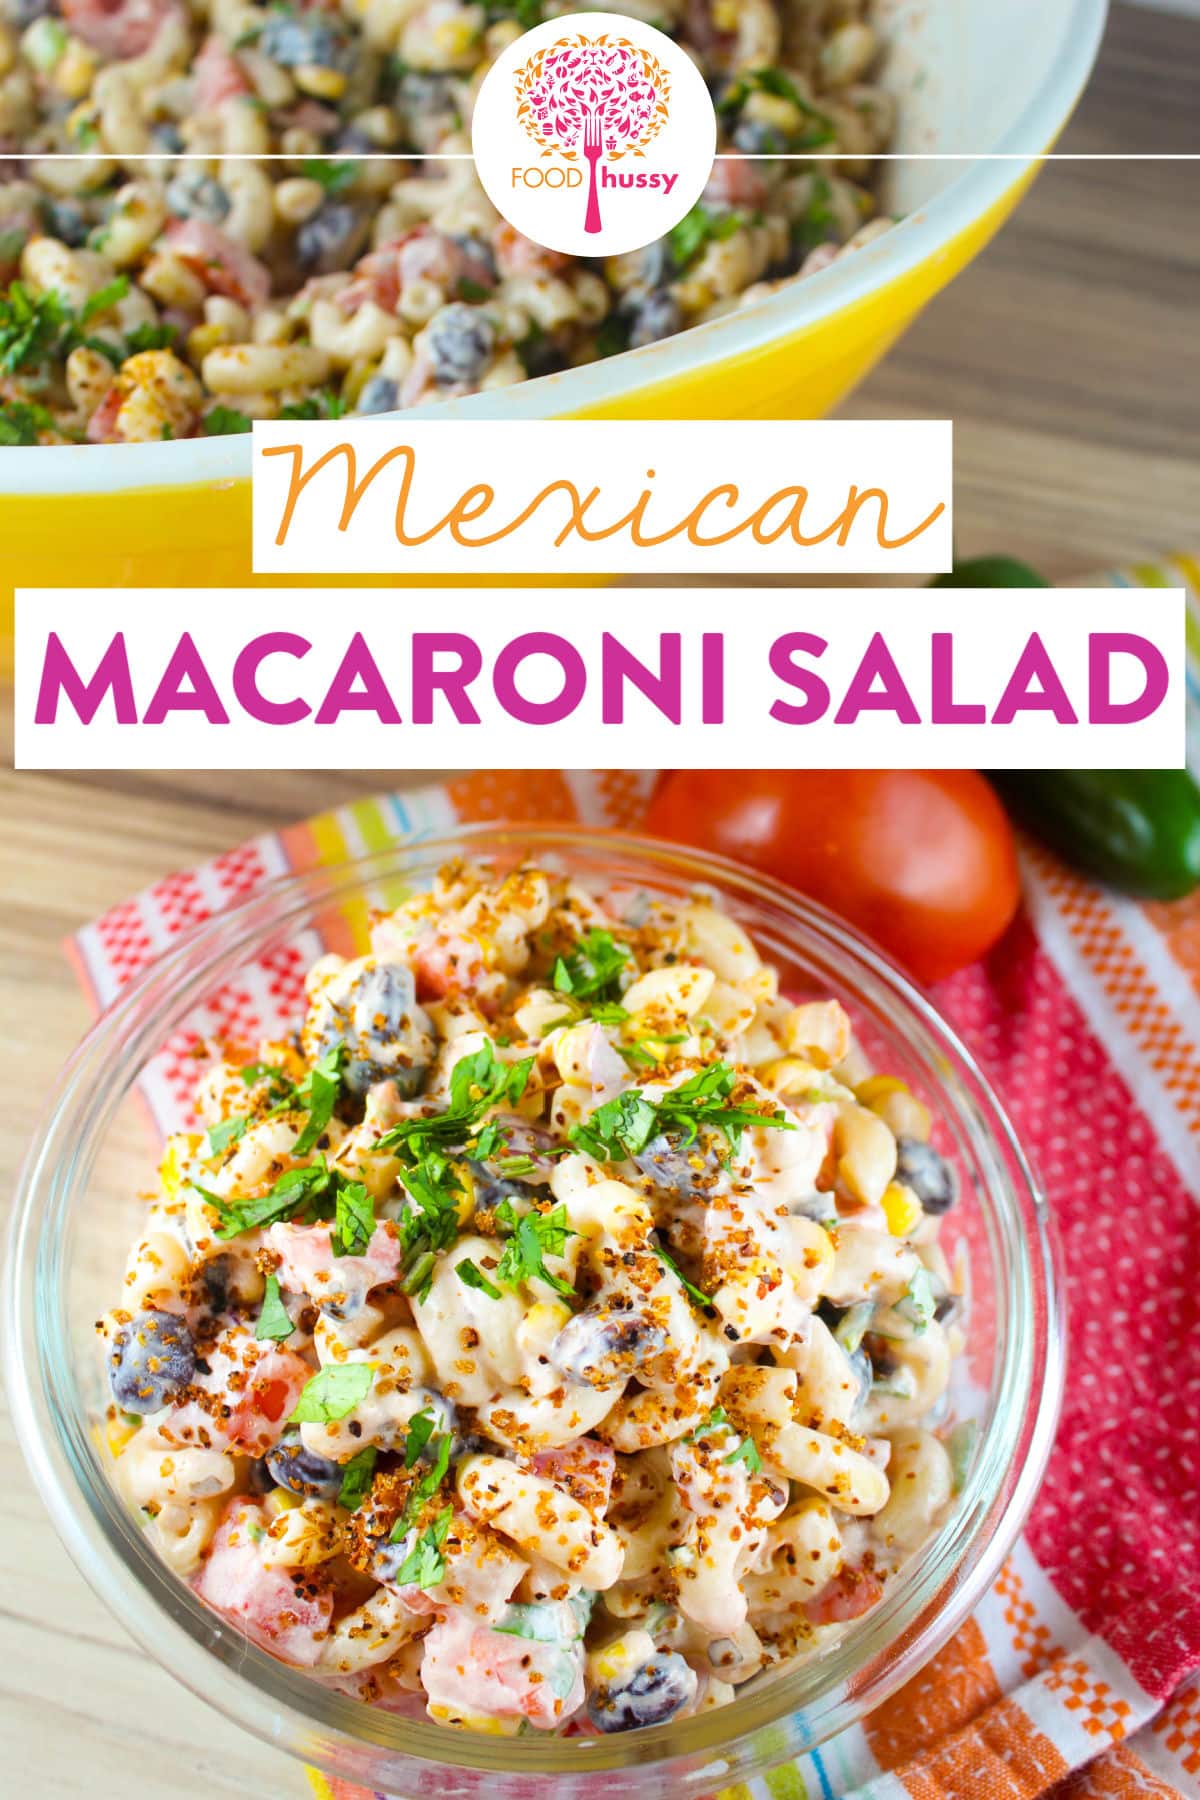 This Mexican Macaroni Salad is creamy, crunchy and perfect for picnics, lunches and potlucks! Macaroni loaded with corn, black beans, tomatoes, onions and more all tossed in a dressing of sour cream, salsa & mayo.
 via @foodhussy